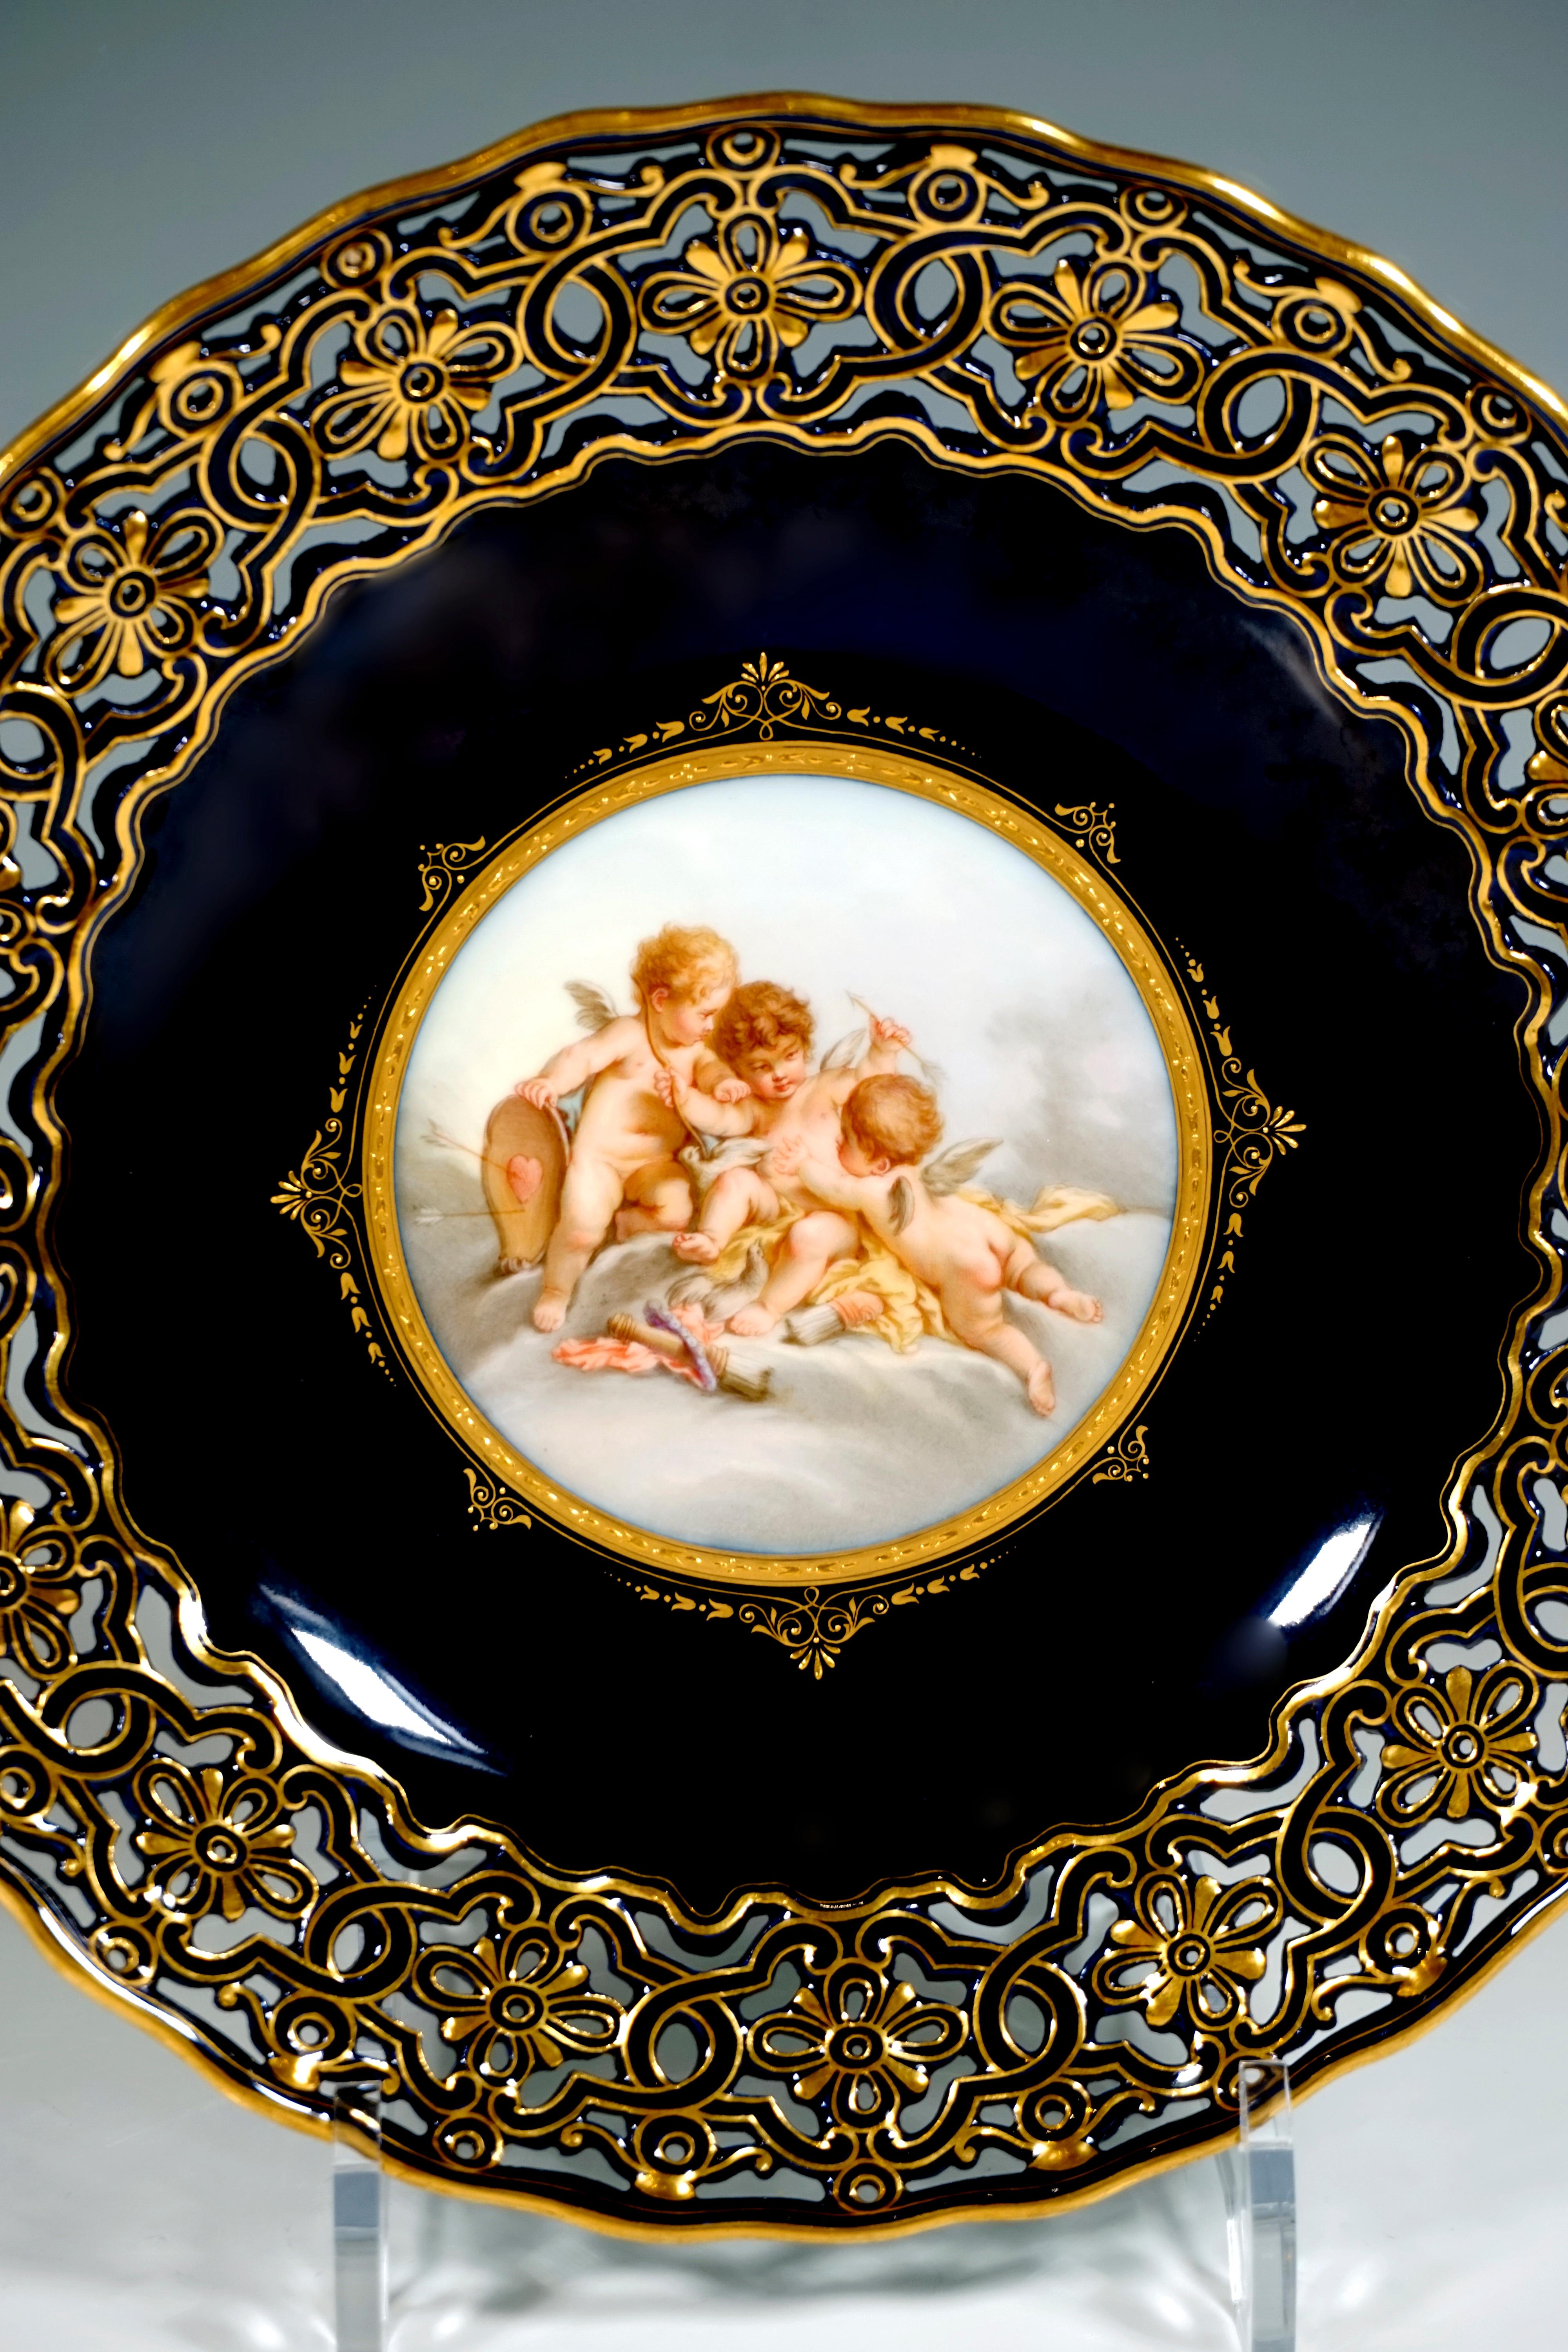 Elegant splendour plate with cobalt blue background painting, in the center a round medallion with the finest, polychrome painting depicting three cupids wrestling in a cloudy landscape, matt gold rim with impasto decoration in shiny gold,